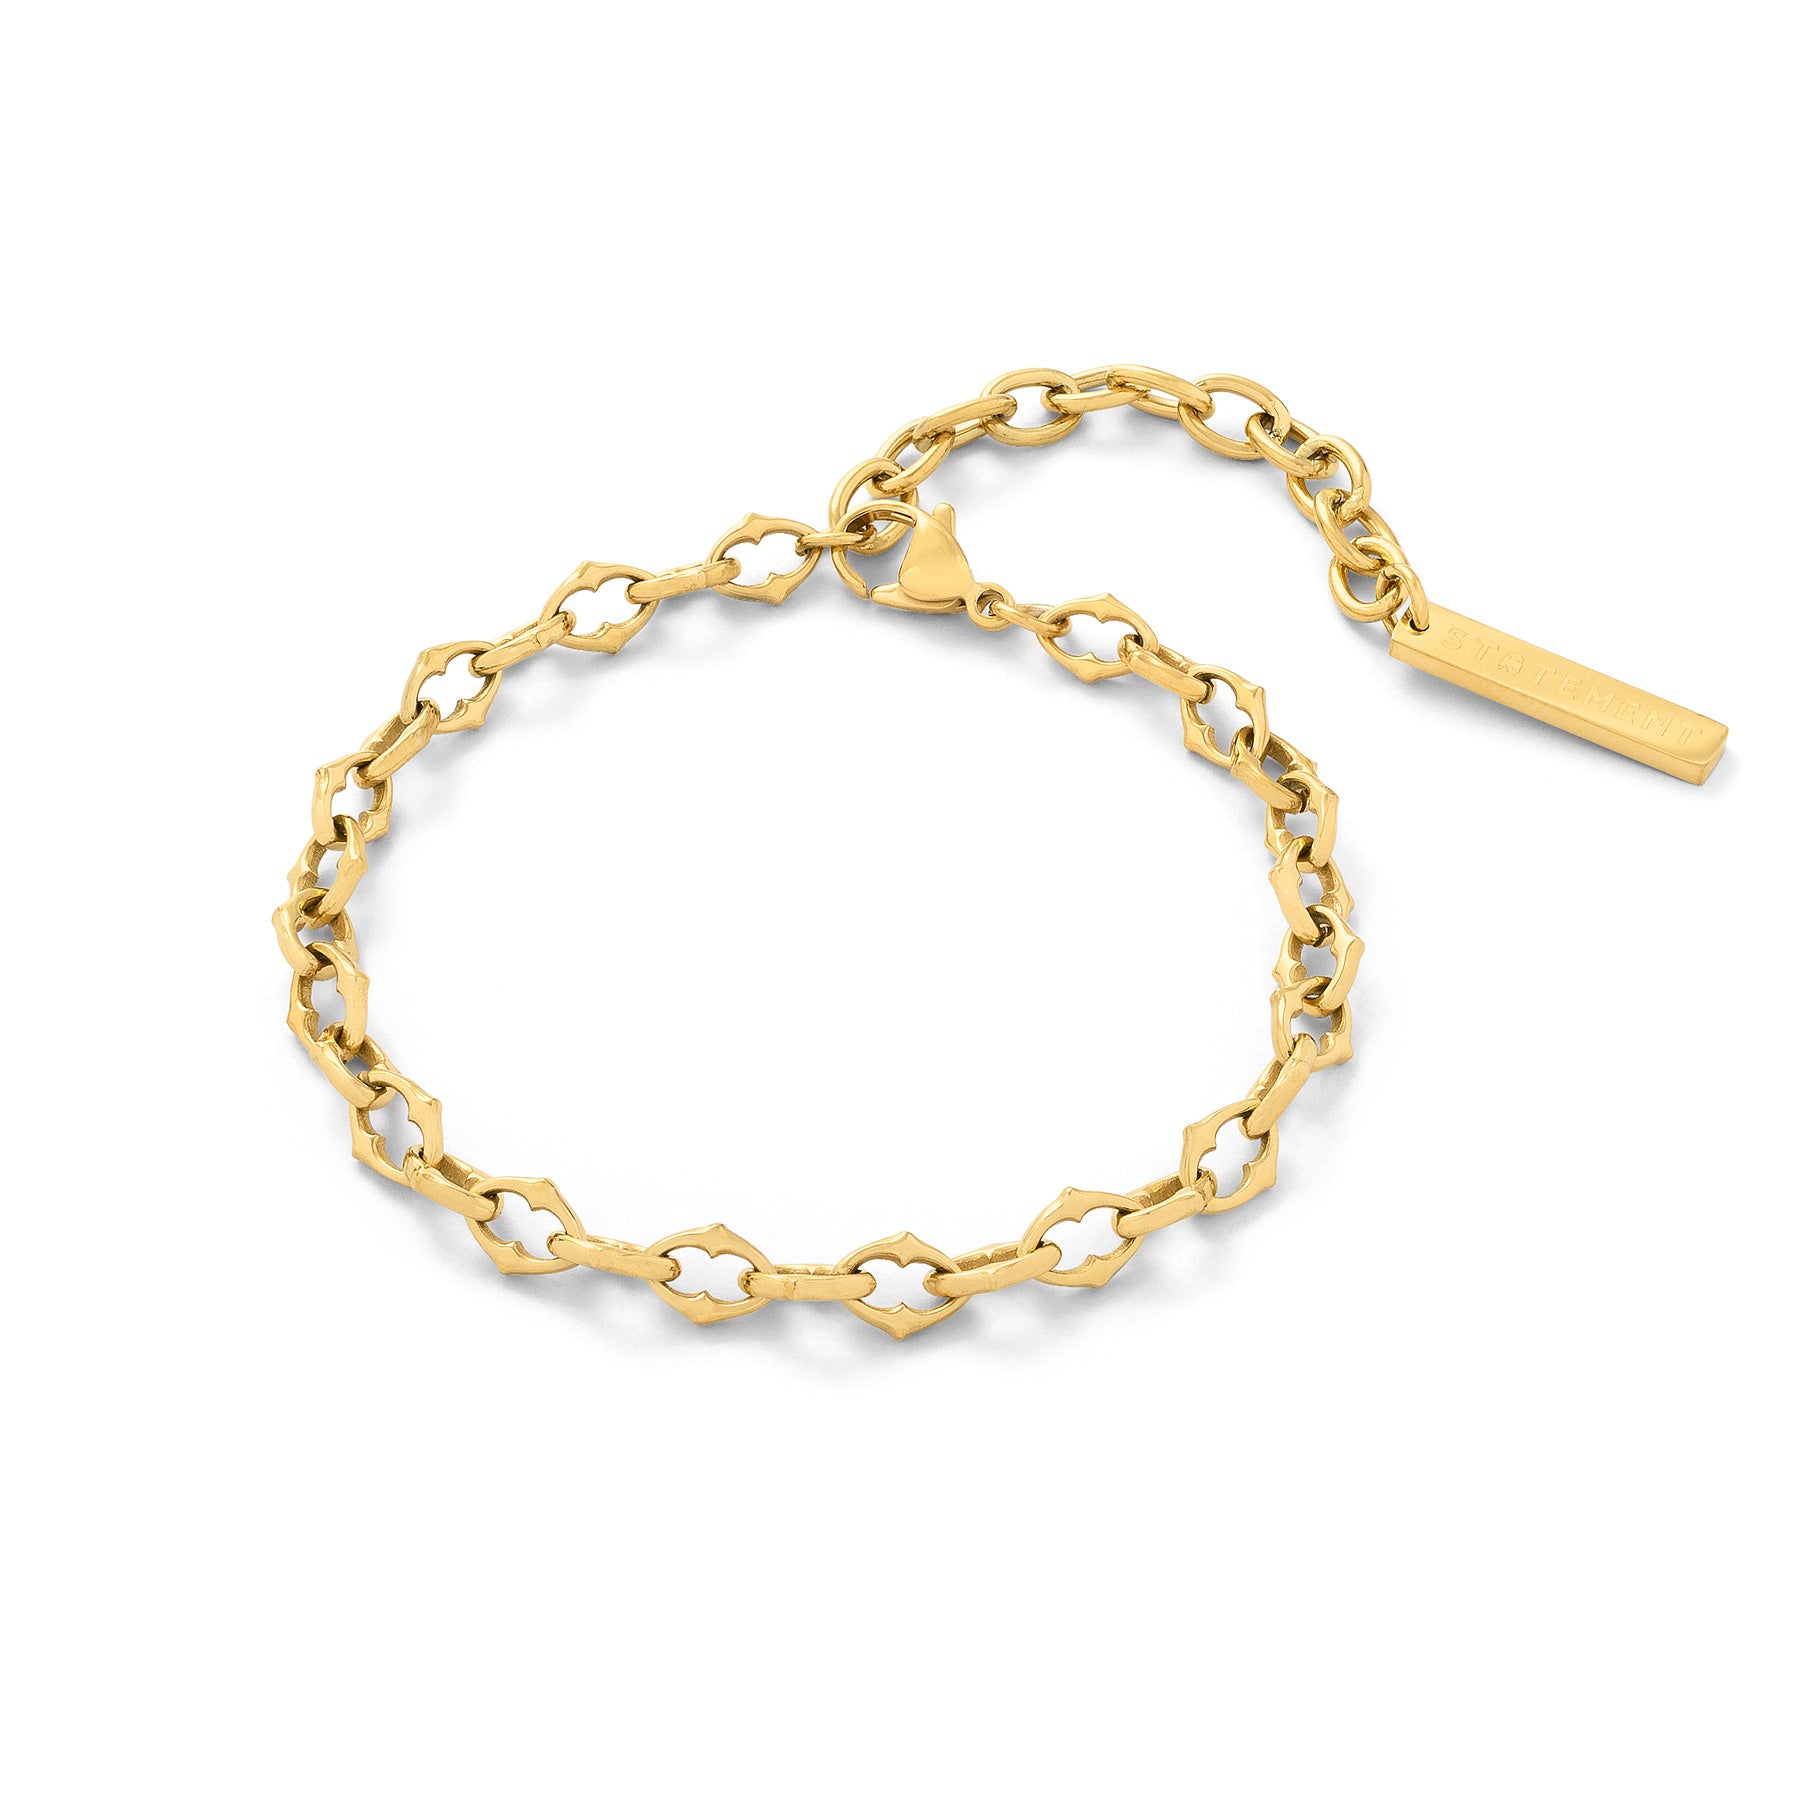 Statement Collective - "The Cathedral" 6mm Spiked Link Chain Bracelet (Gold)